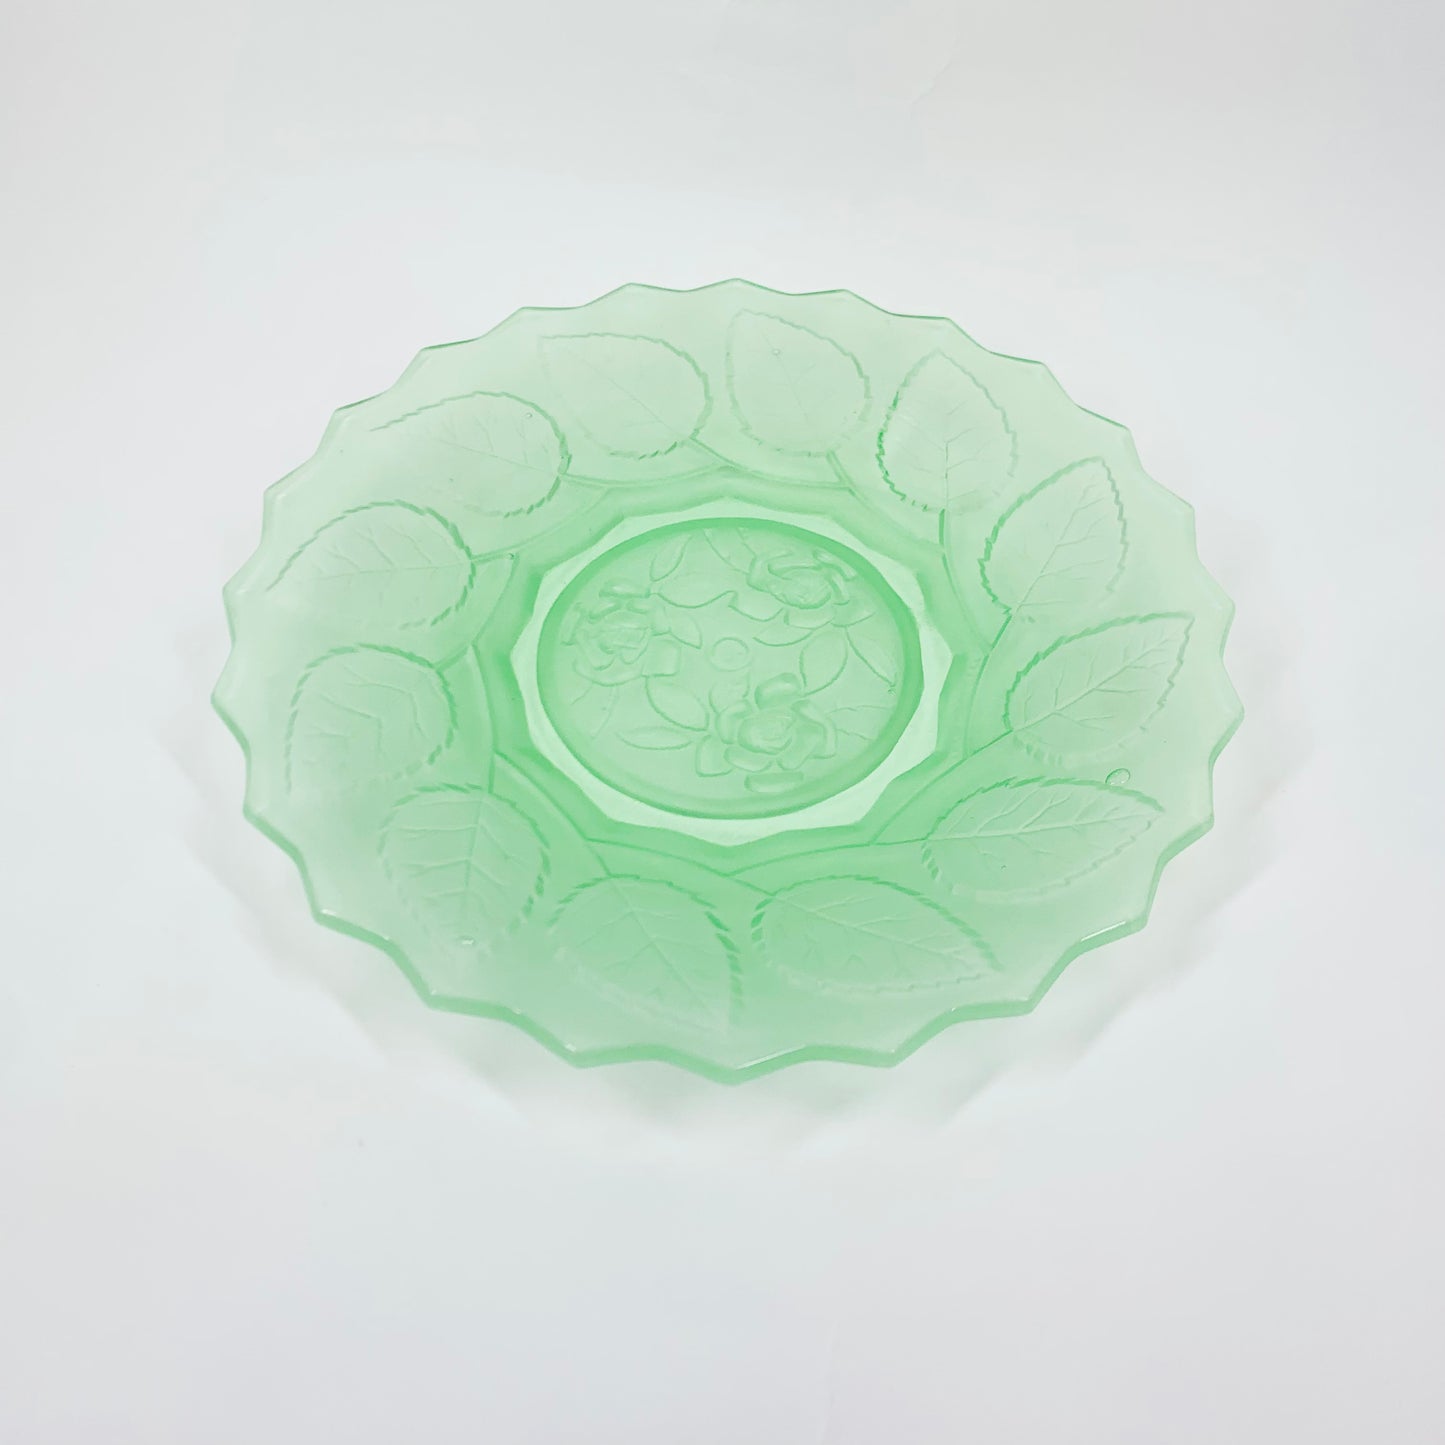 Antique uranium glass plate with leaves motif